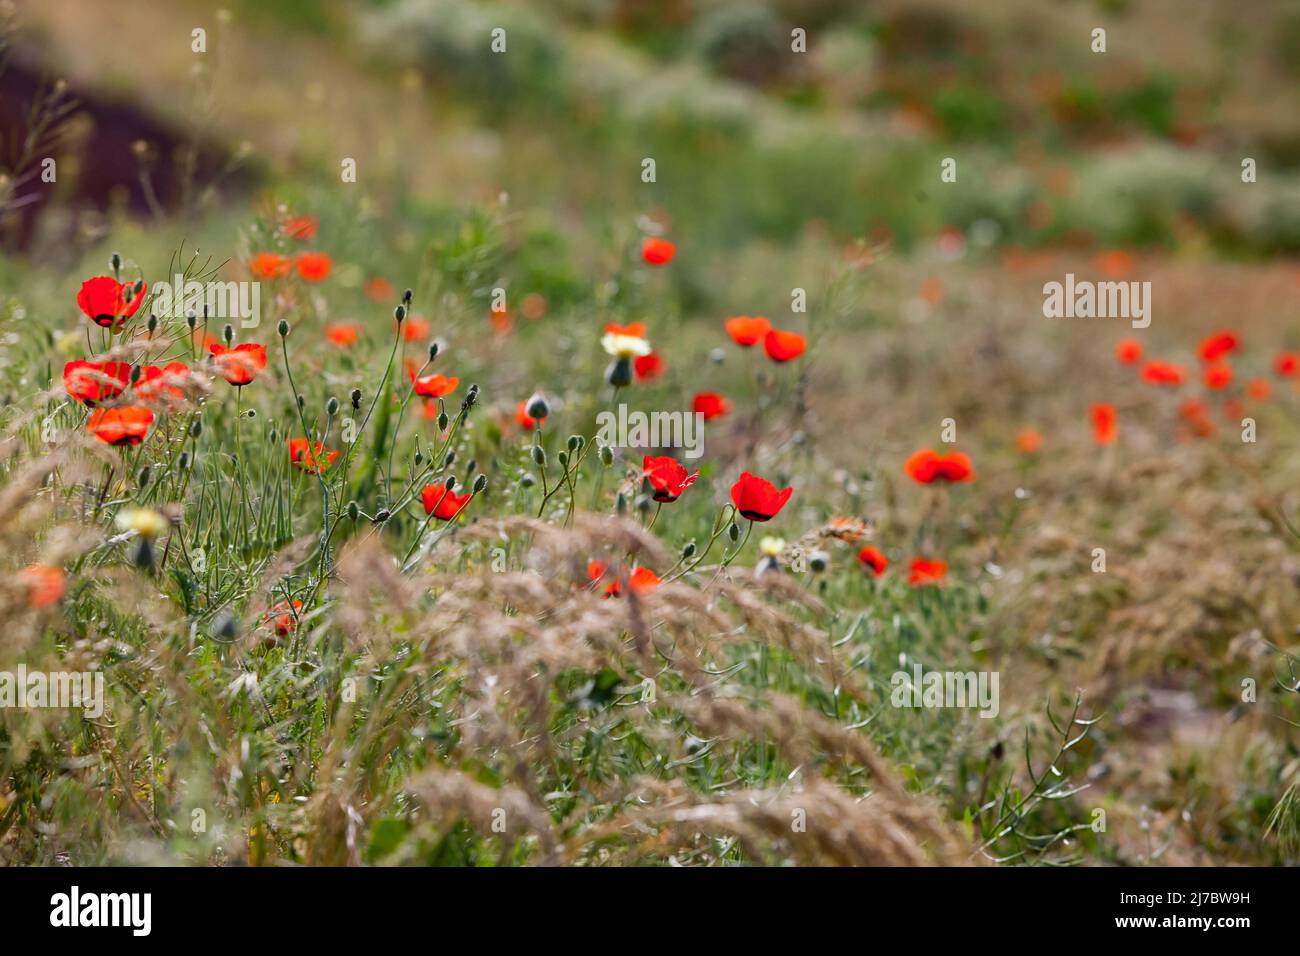 Flowering in nature. Wild red poppy flowers in focus only. Spikelet grass on foreground, blurred. Low depth-of-field. Stock Photo